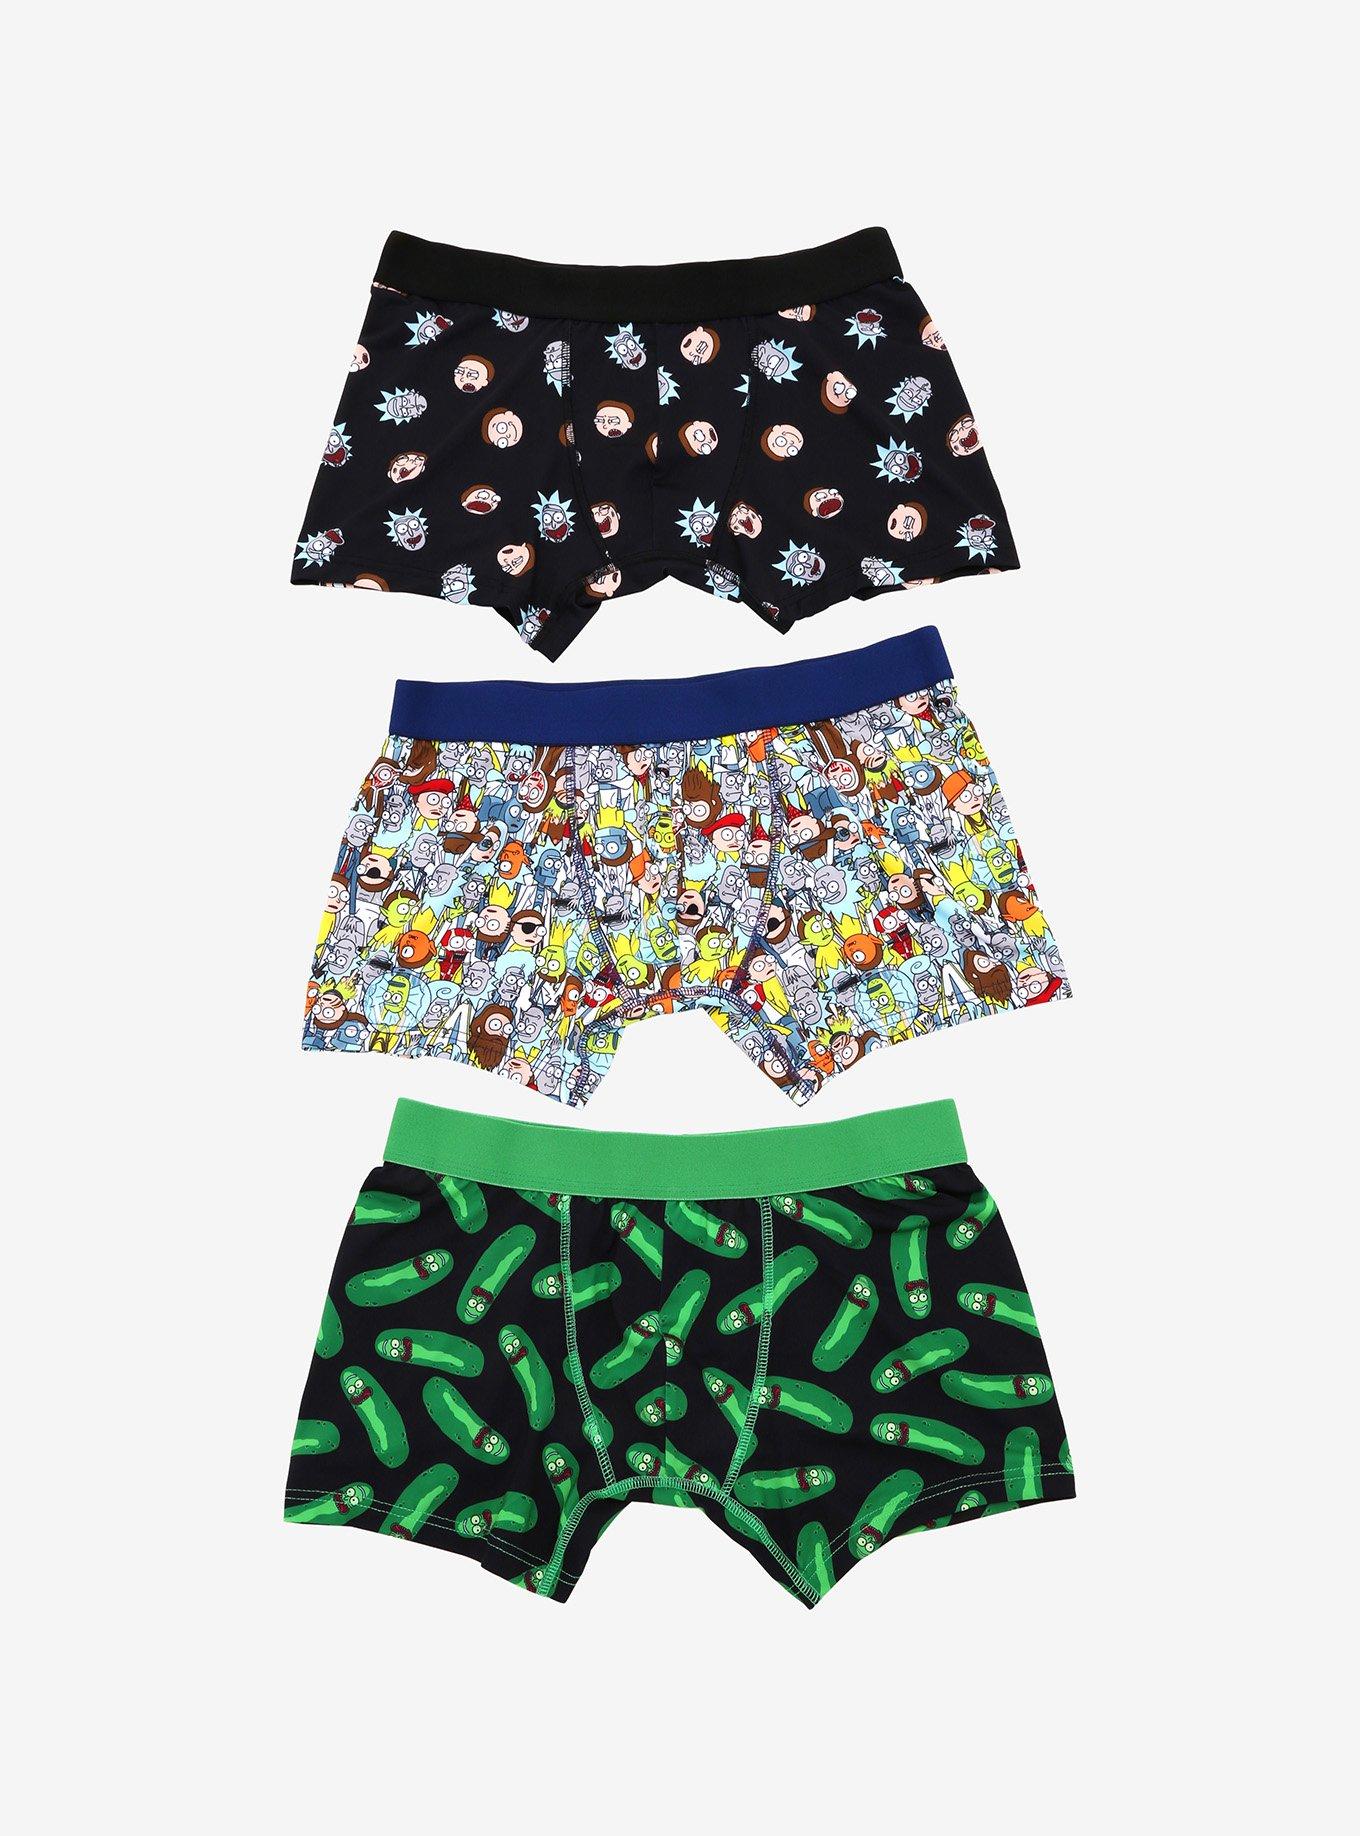 Rick And Morty Boxers